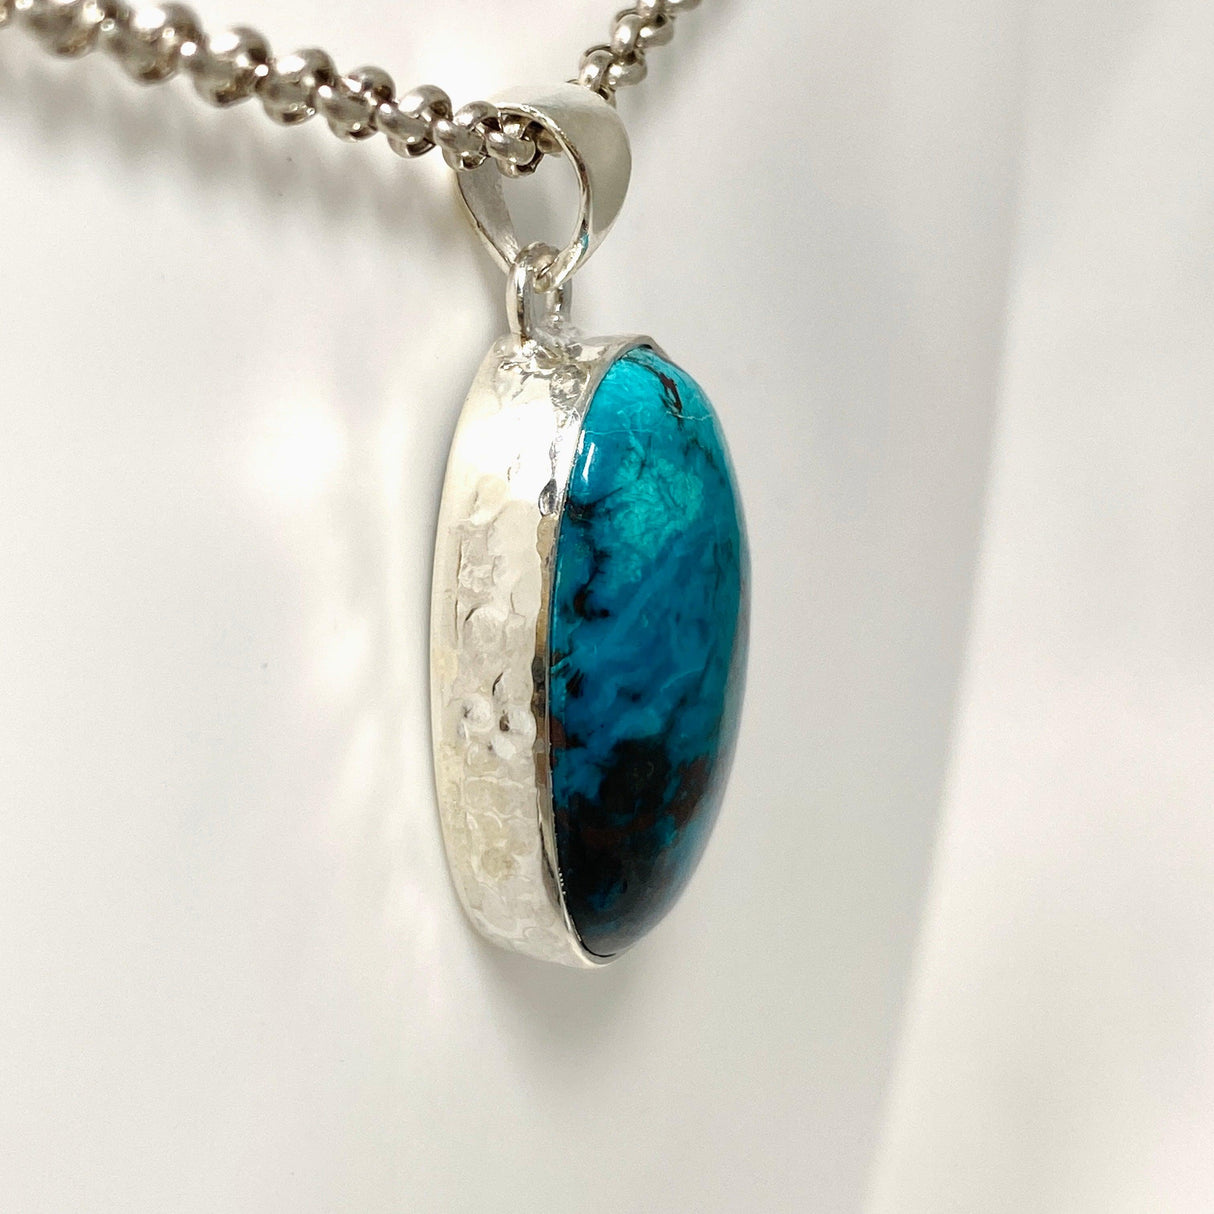 Shattuckite Oval Pendant in a Hammered Setting KPGJ4414 - Nature's Magick